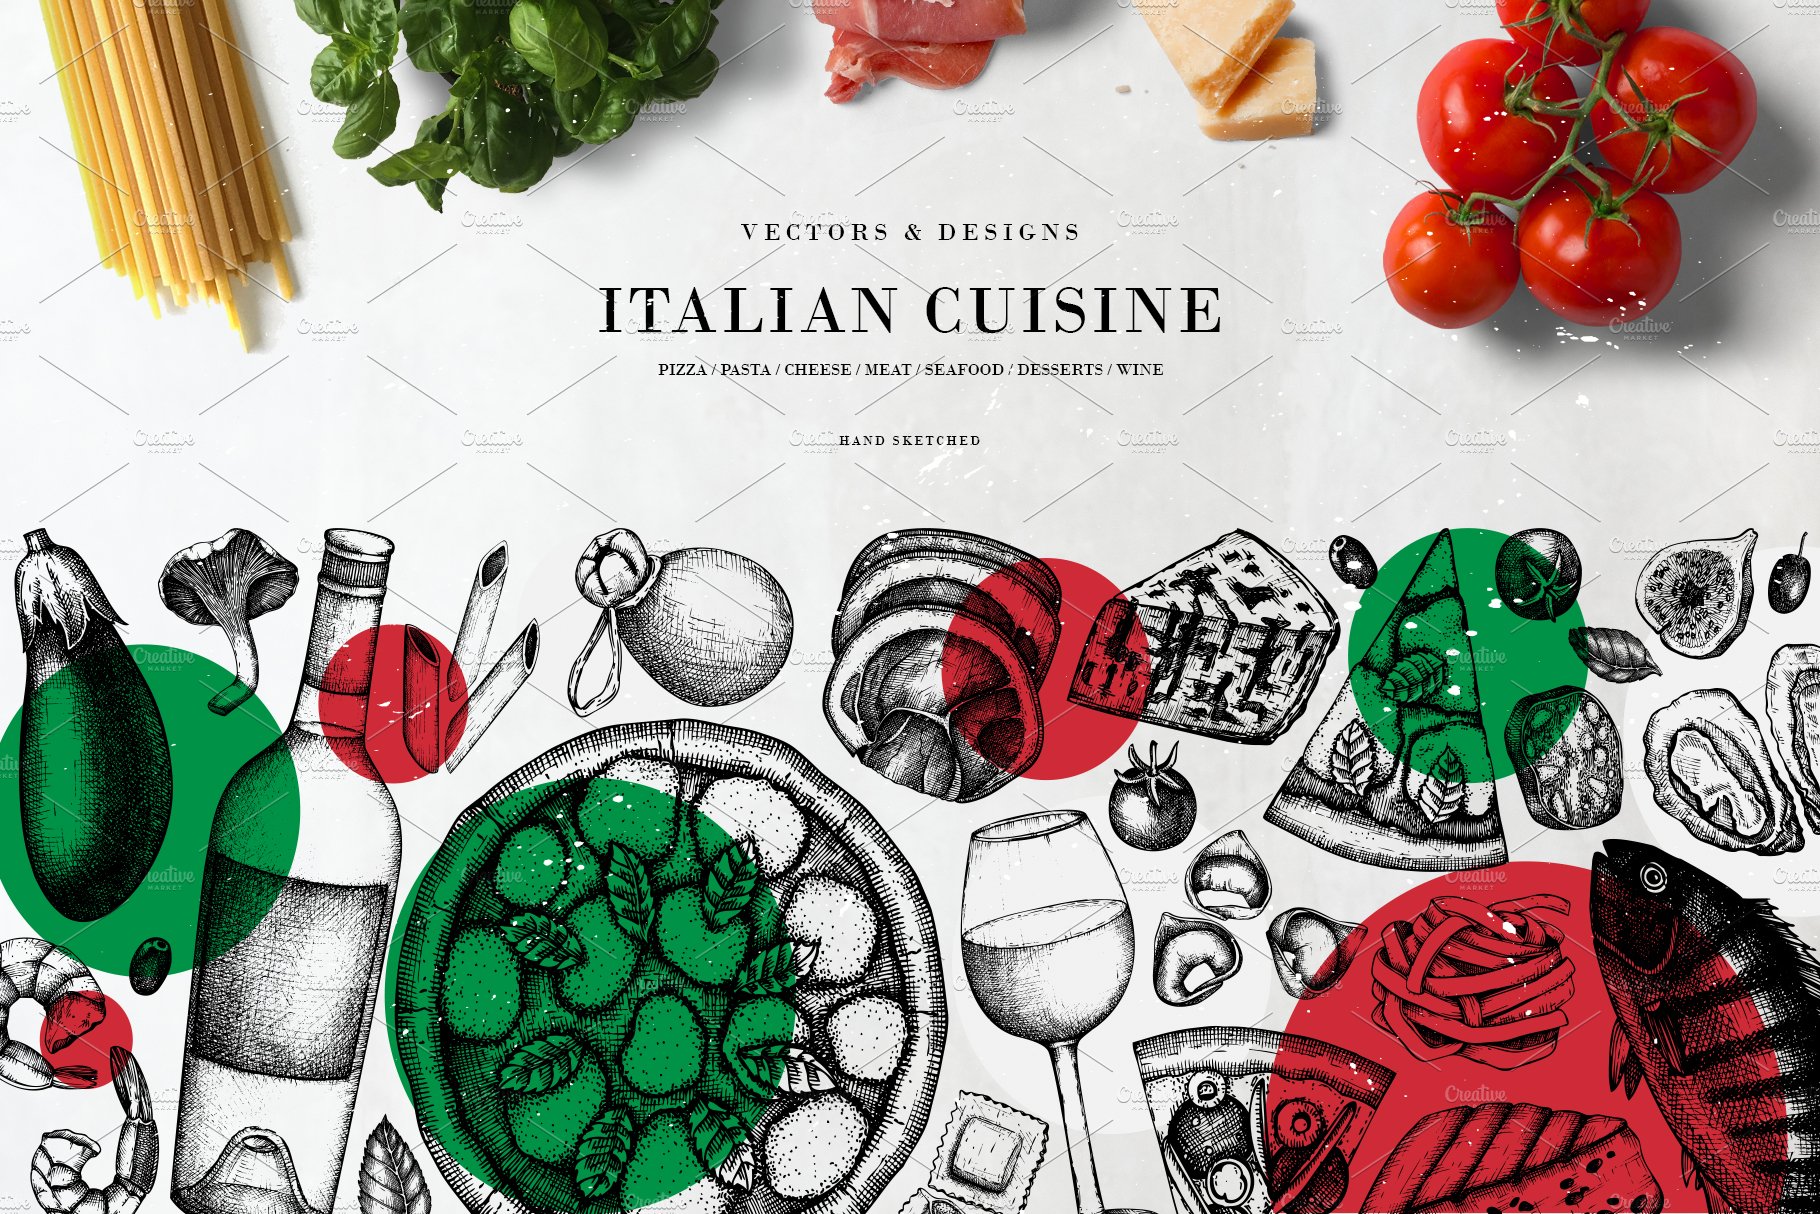 Italian Food Sketches & Designs cover image.